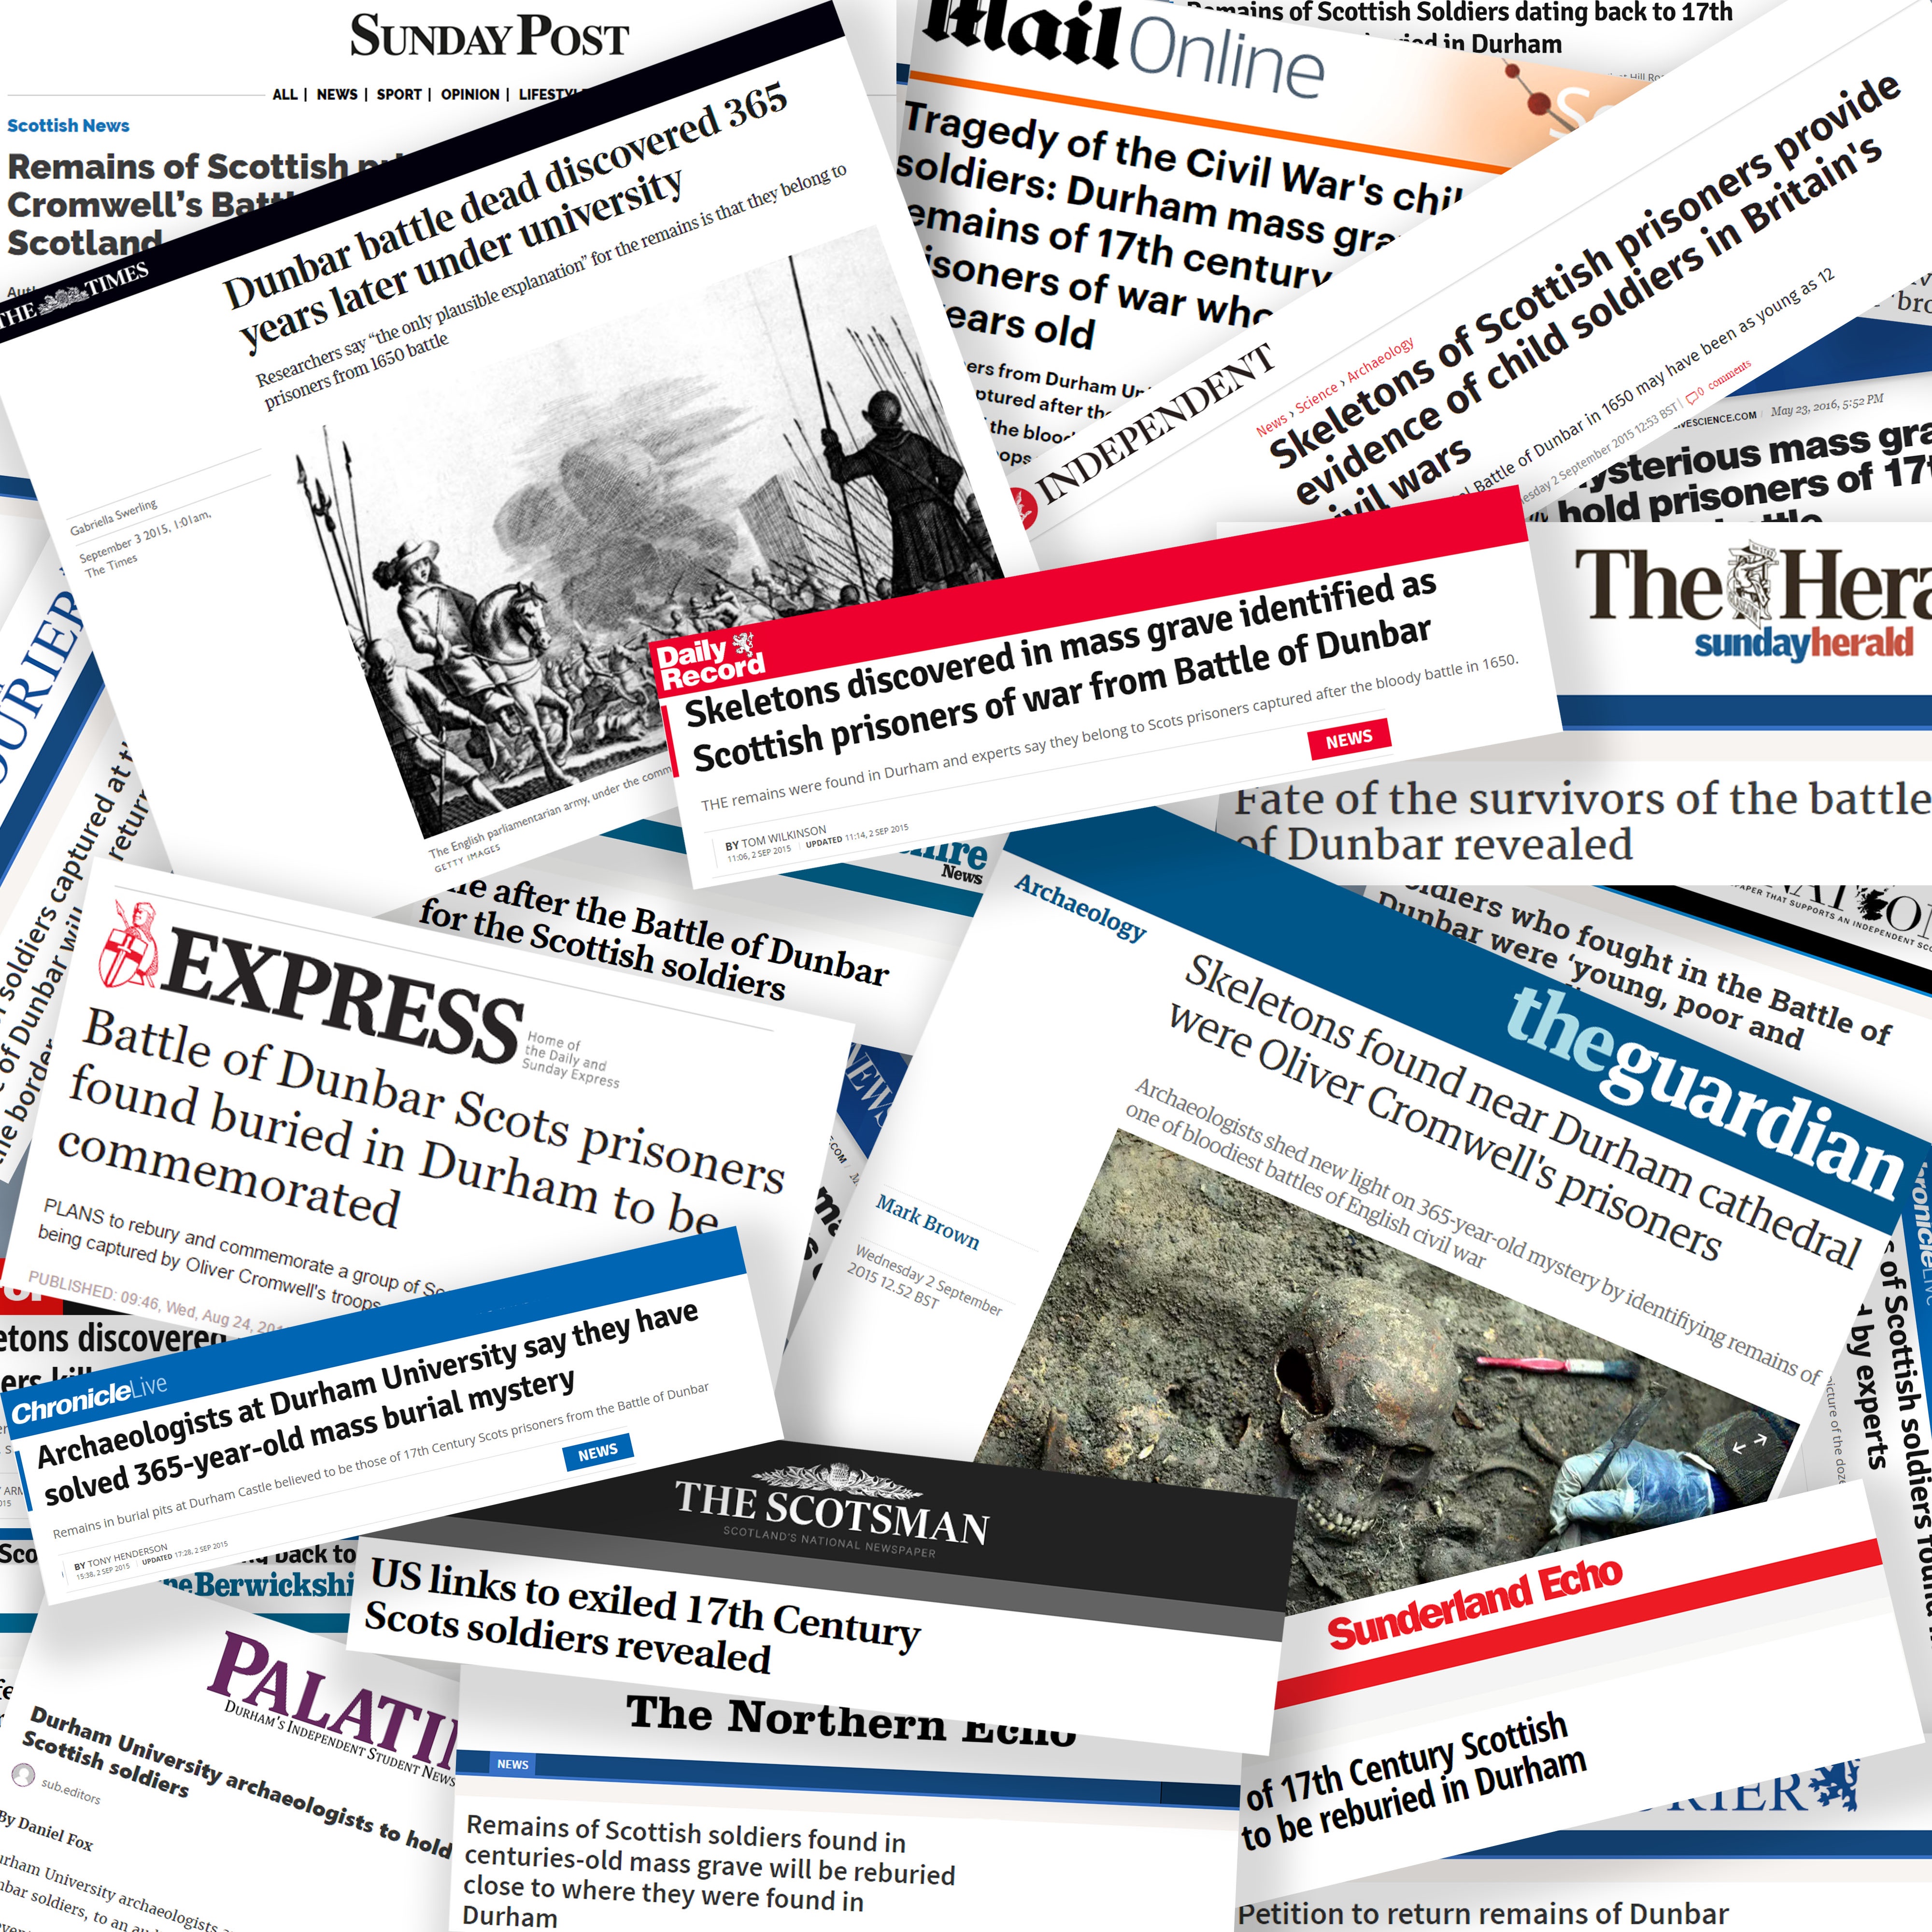 Montage of newspaper articles